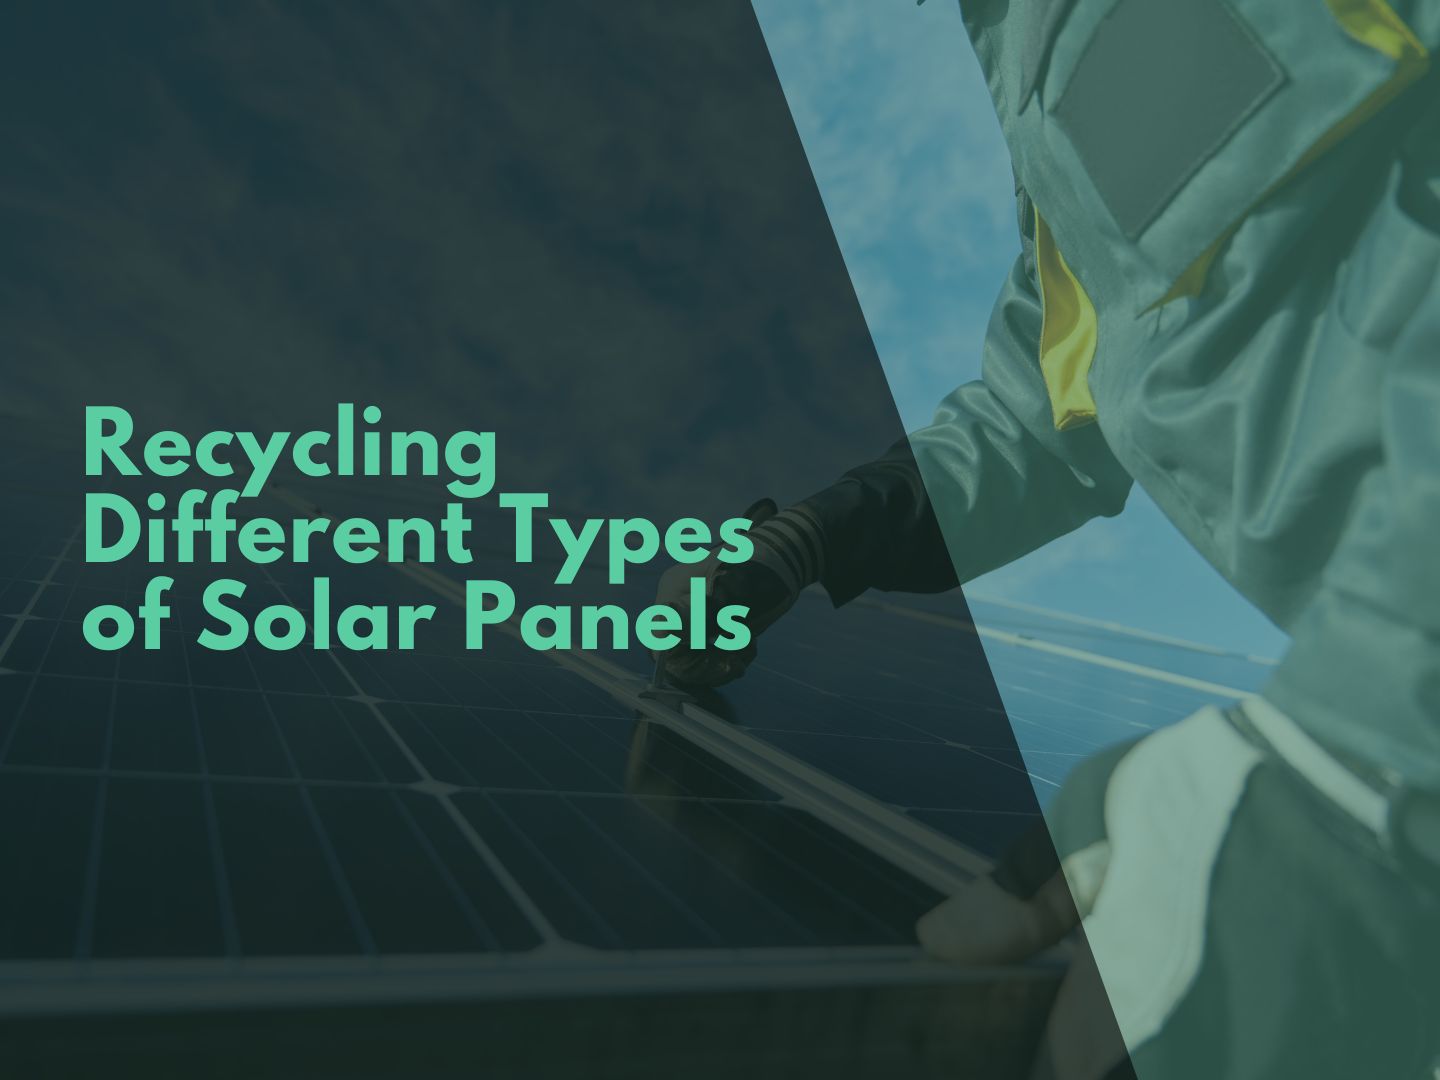 Recycling Different Types of Solar Panels